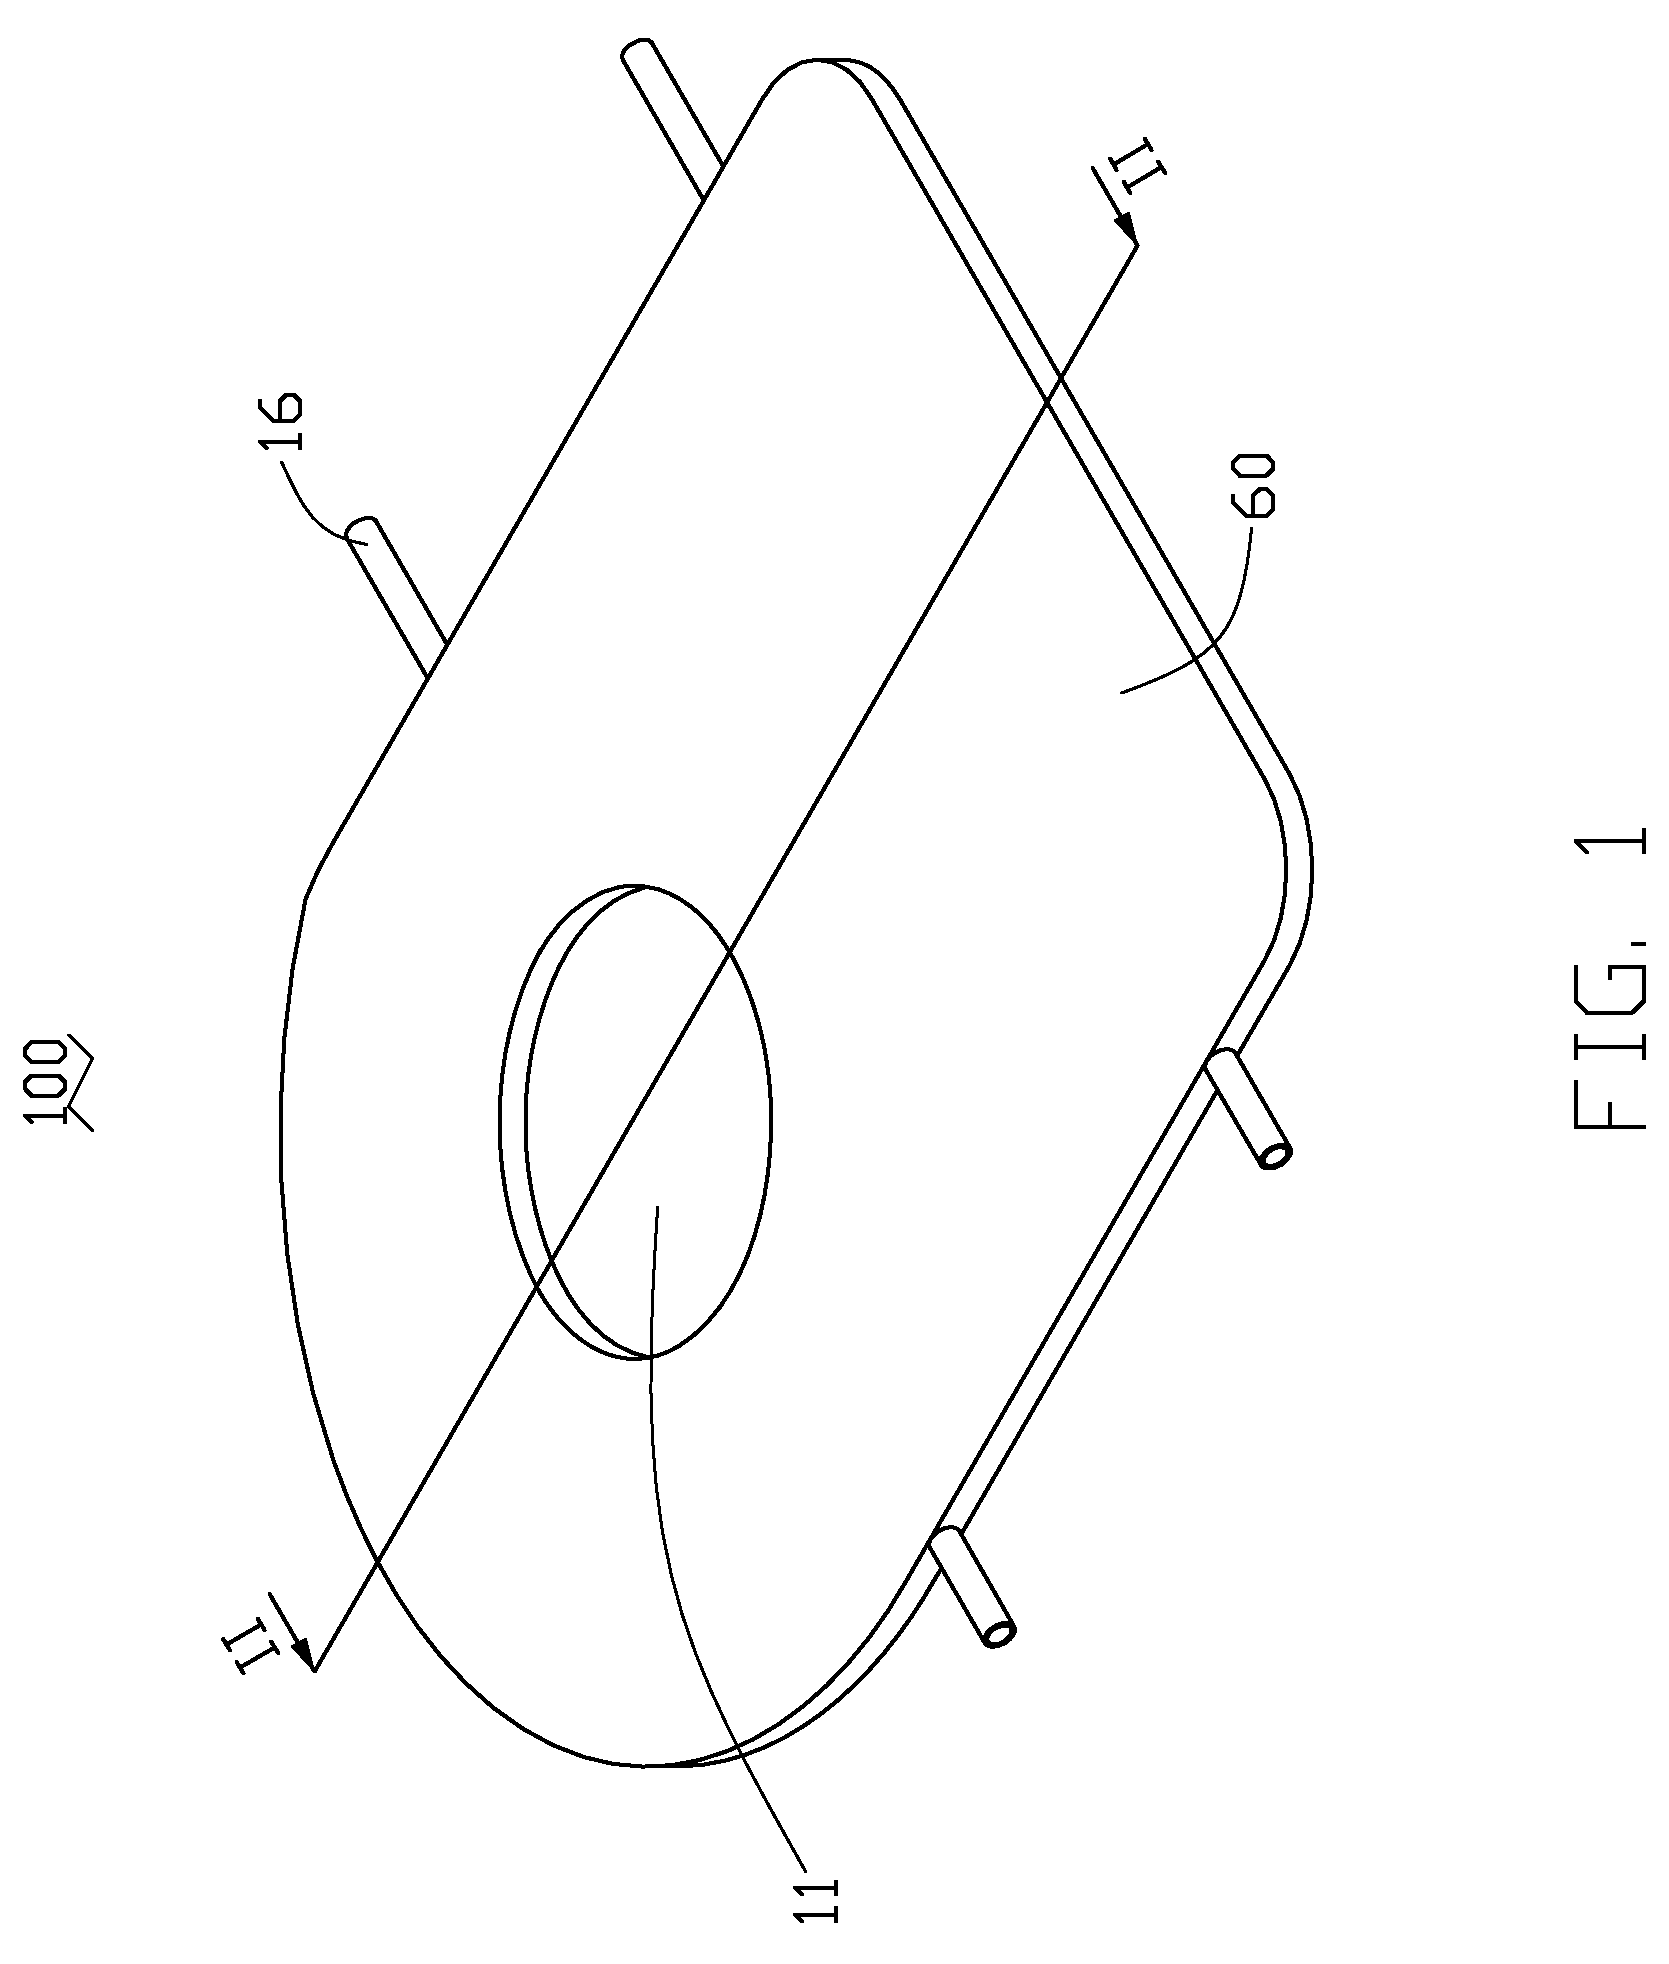 Heat spreader with vapor chamber and method of manufacturing the same